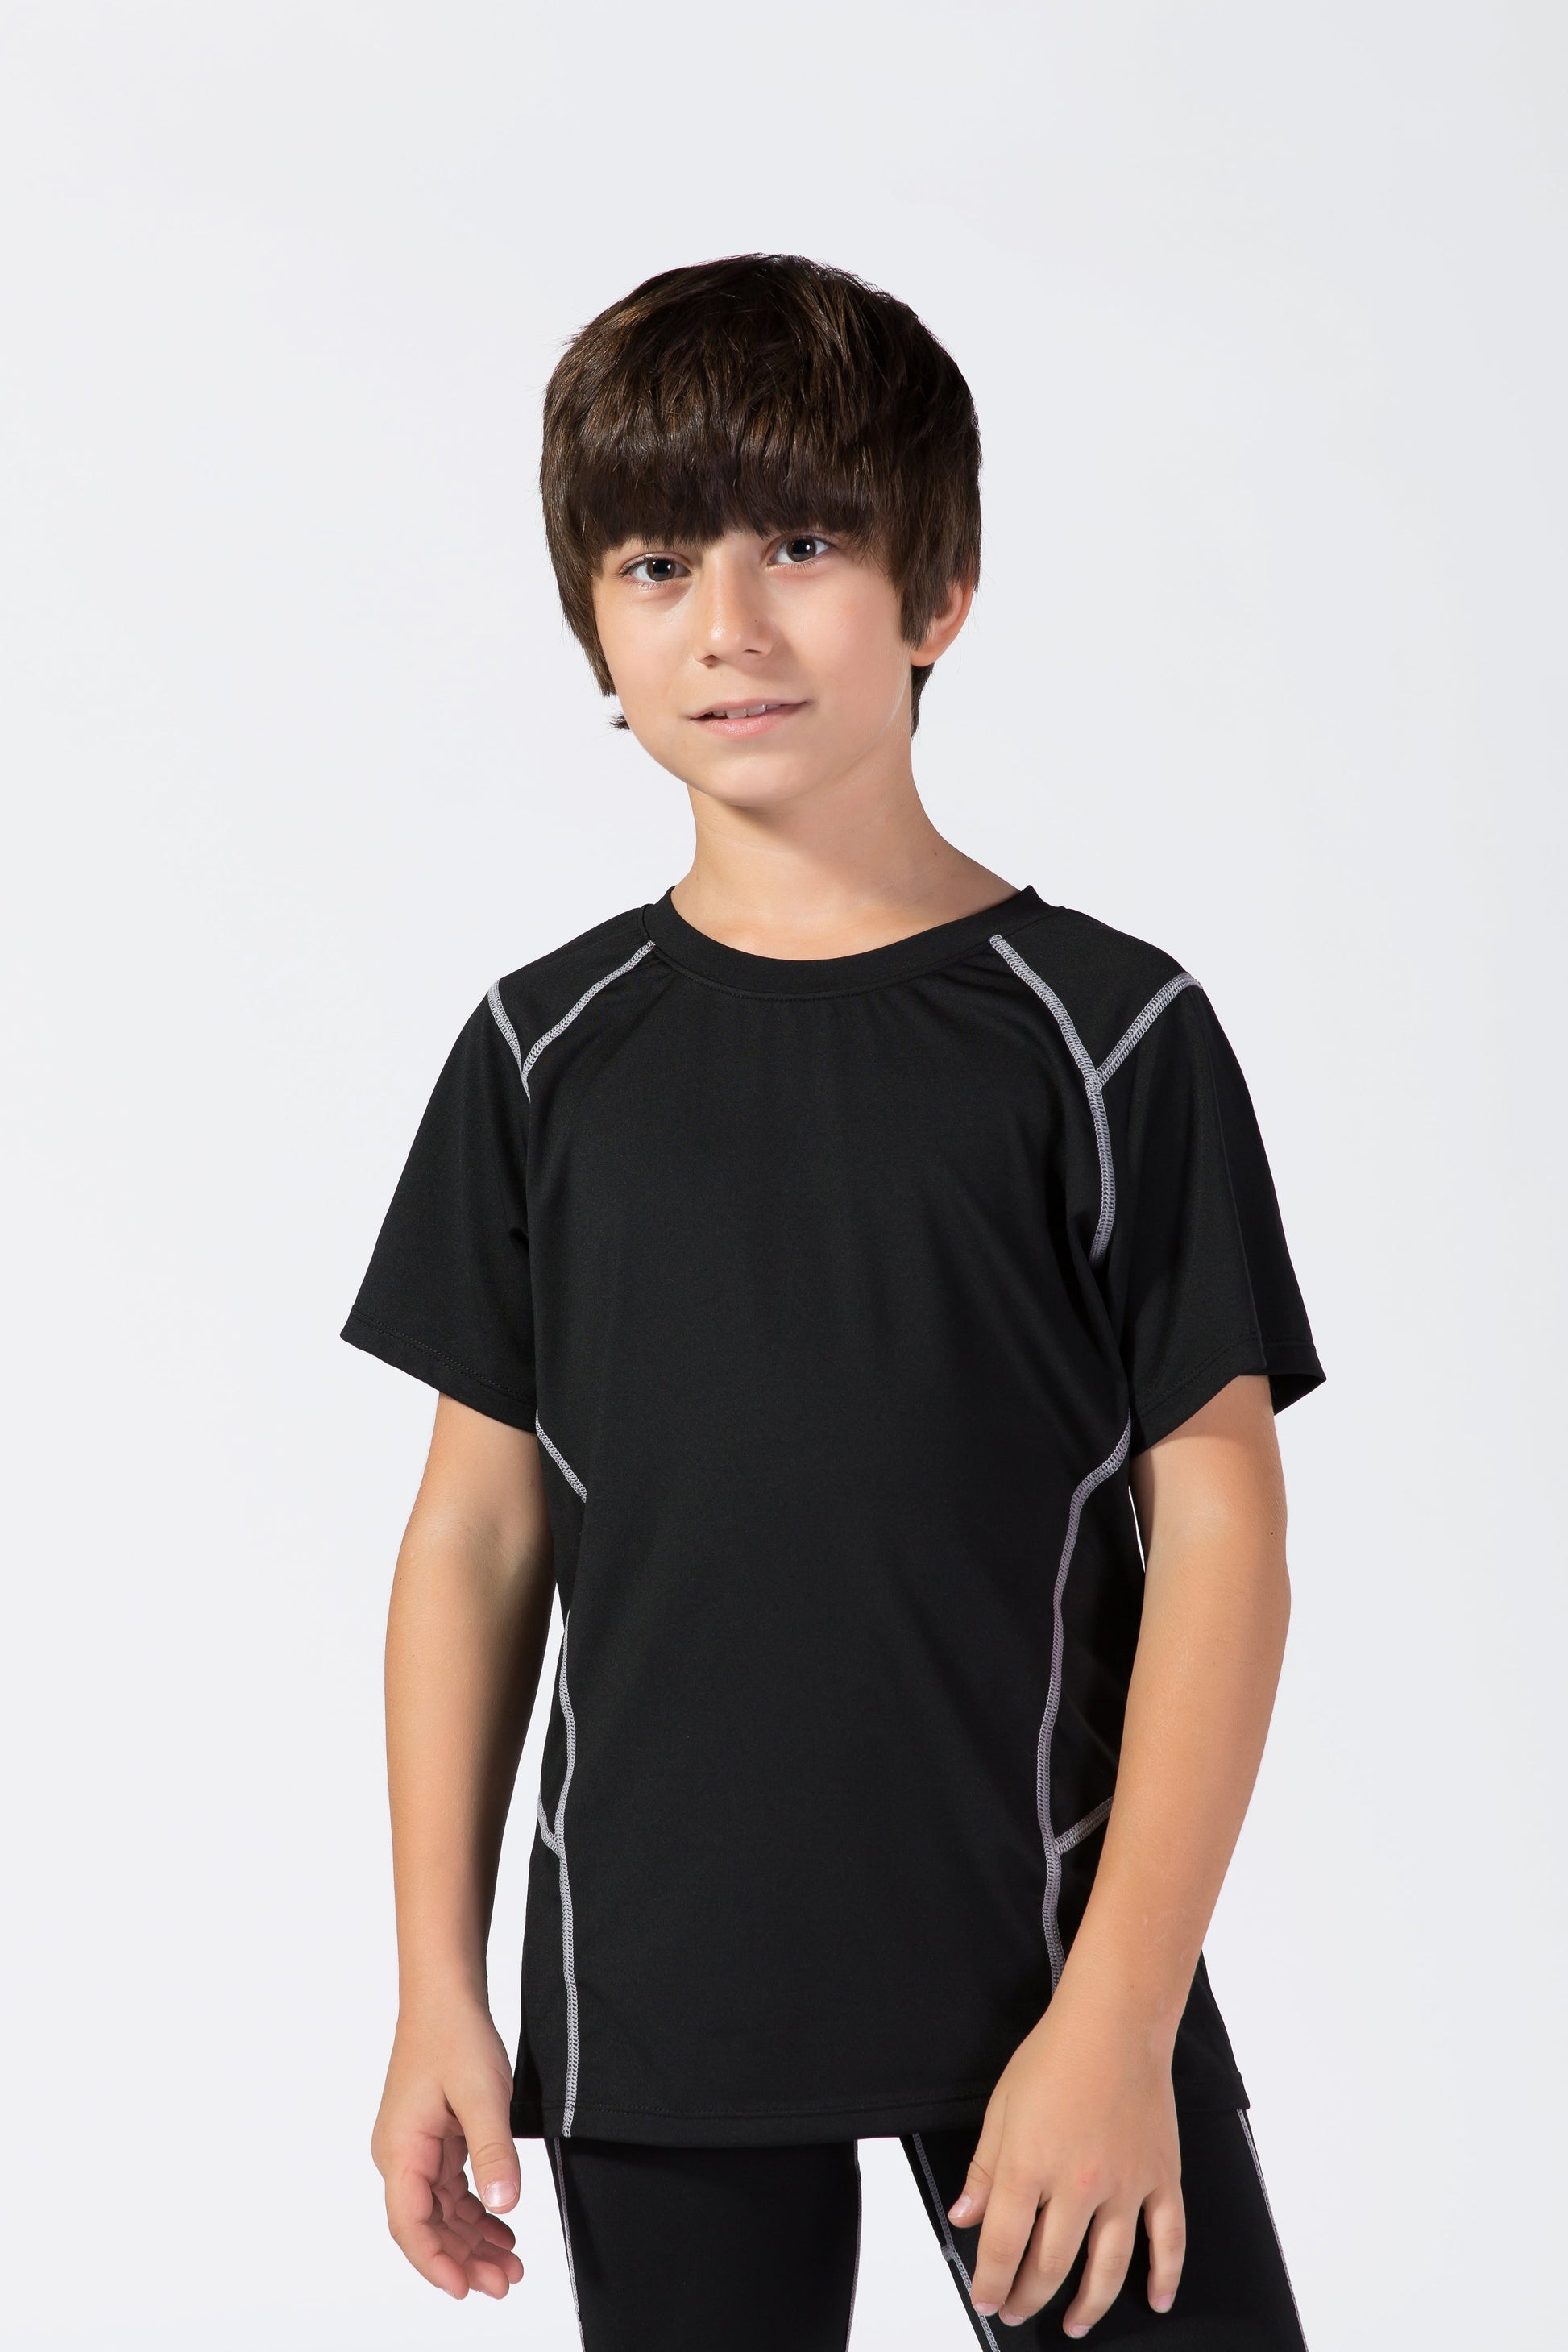 LANBAOSI Kids Running T-shirt Compression Quick Dry Breathable